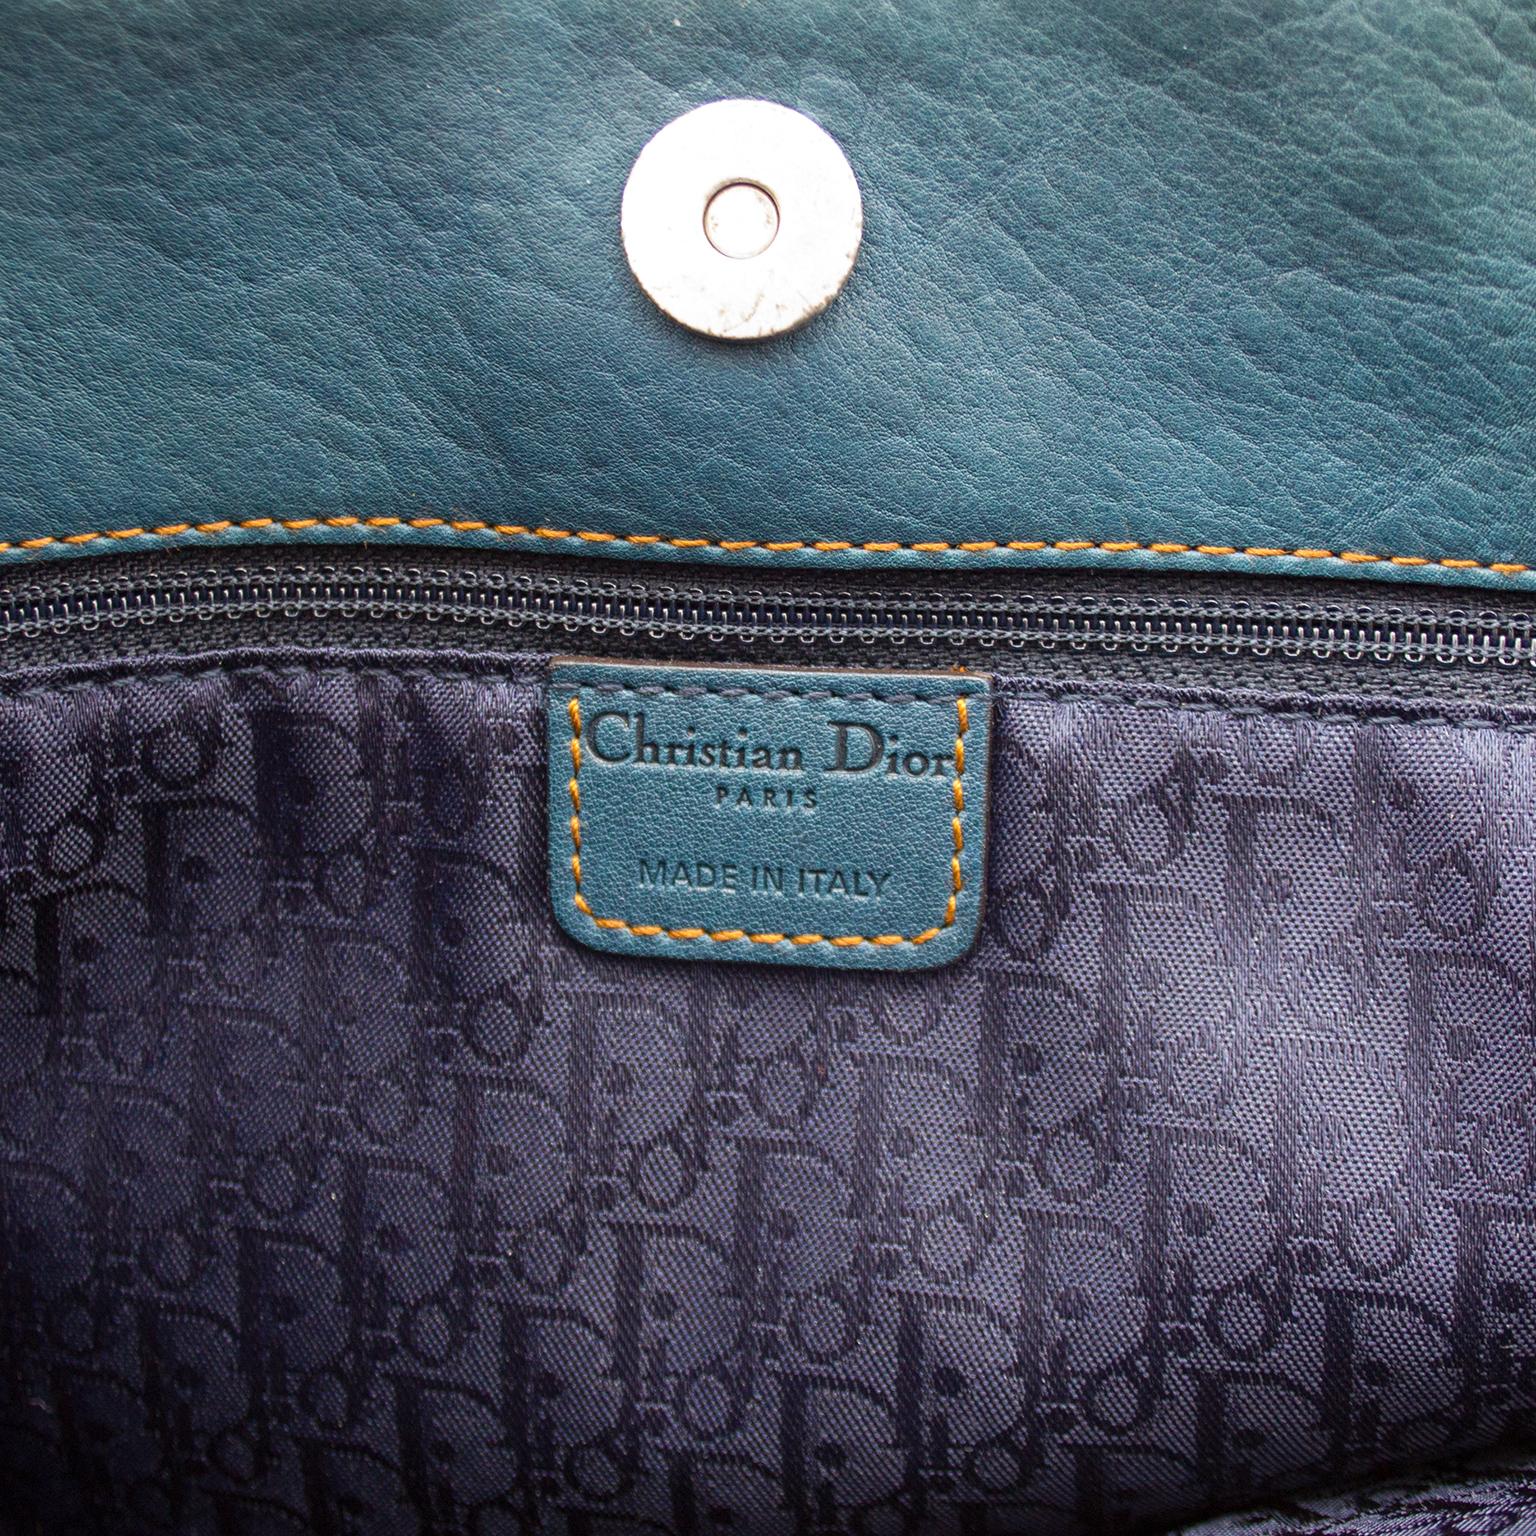 S/S 2006 Dior Double Gaucho Teal Blue Leather Saddle bag 1